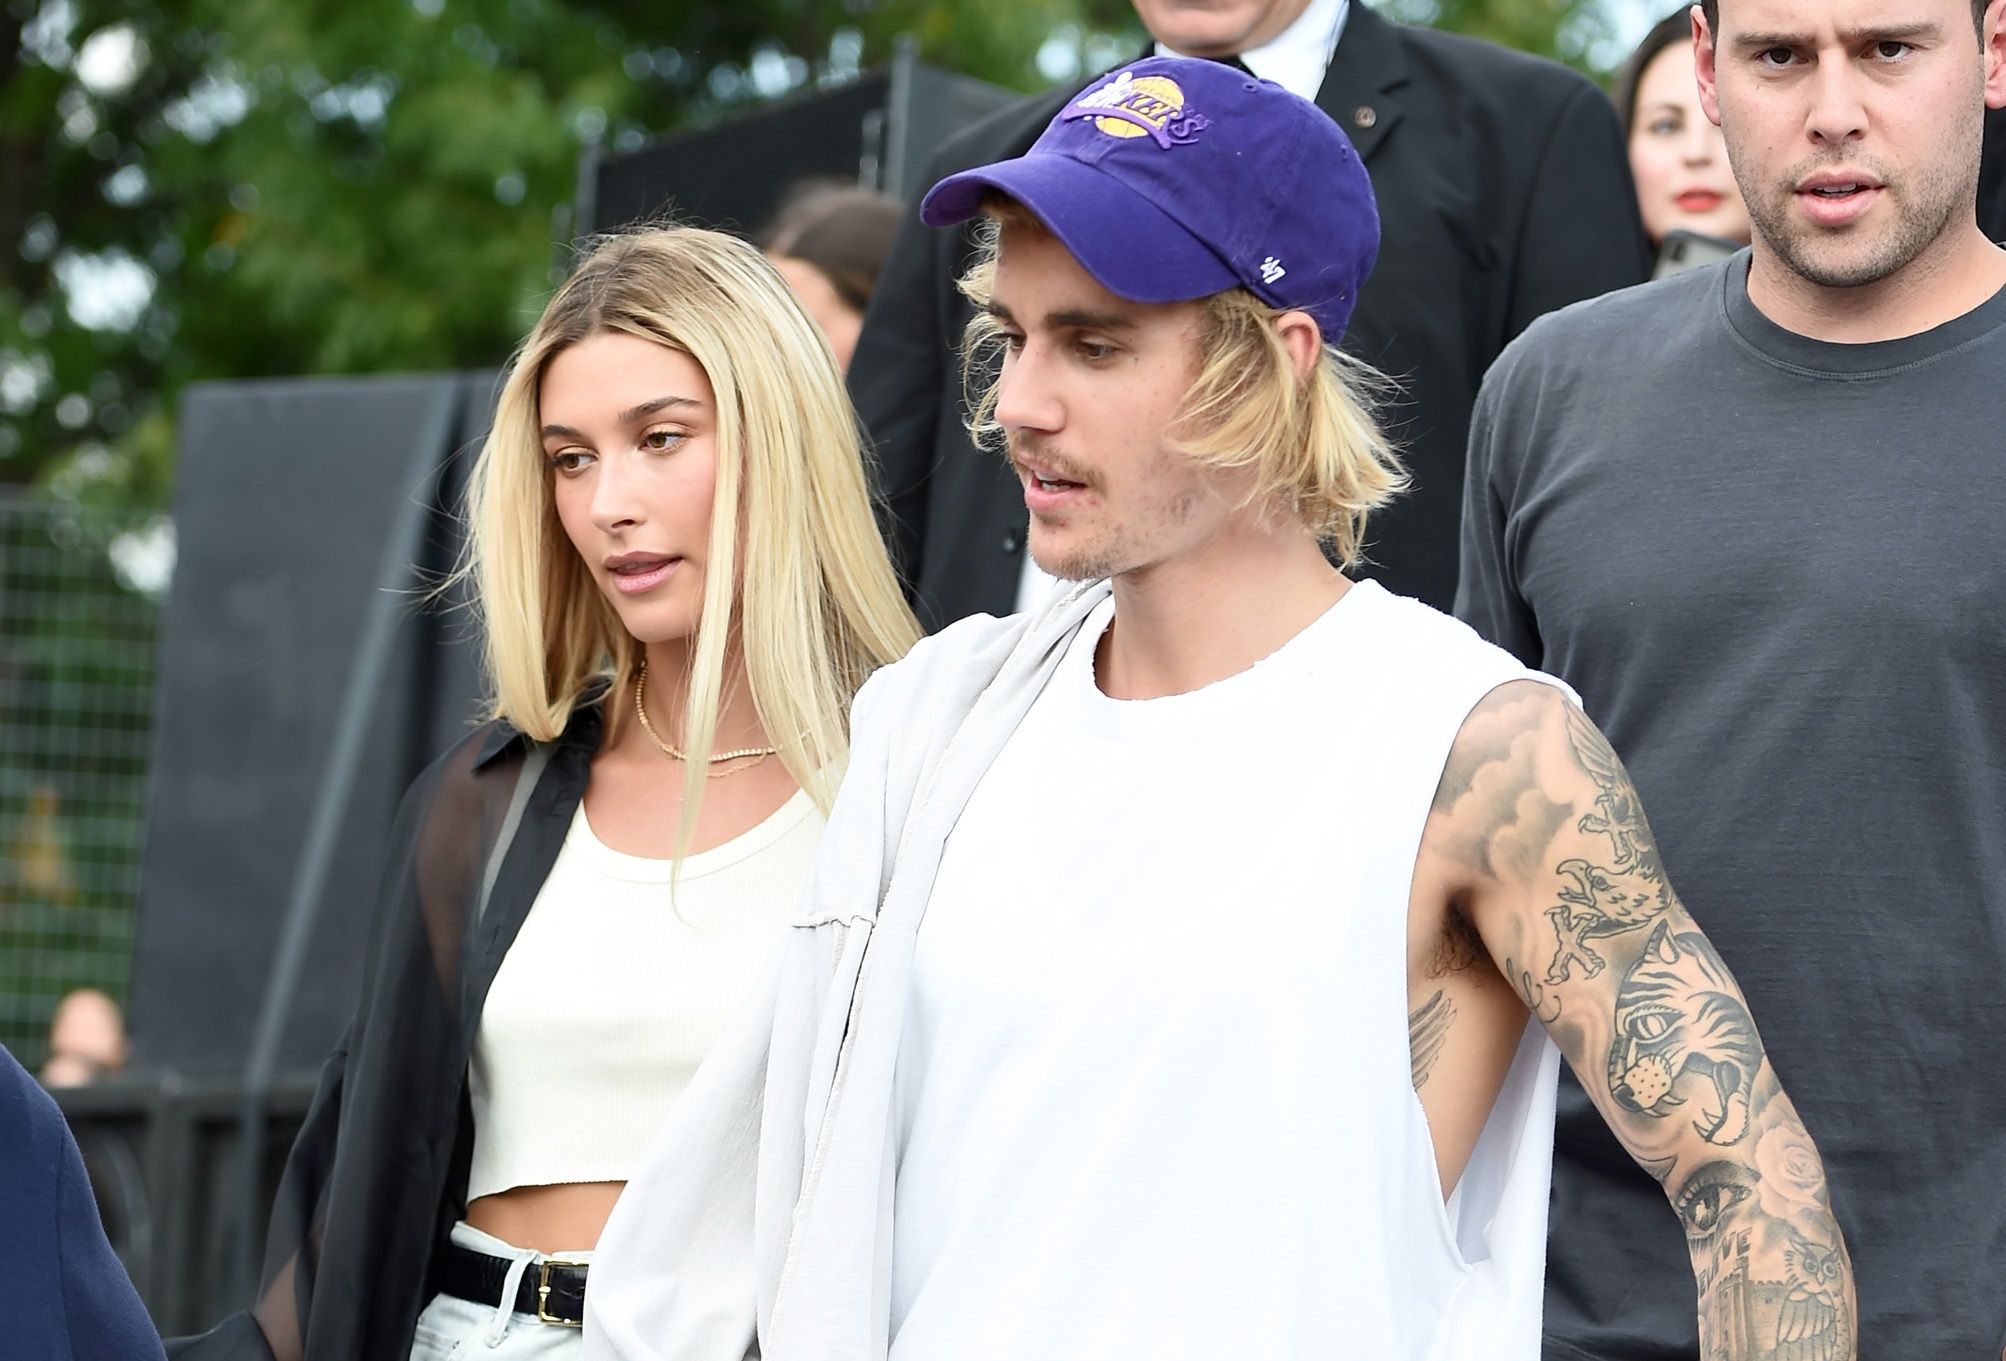 The New Residential Area Of Justin Bieber Is Making Him Eager To Have Kids With Hailey Baldwin